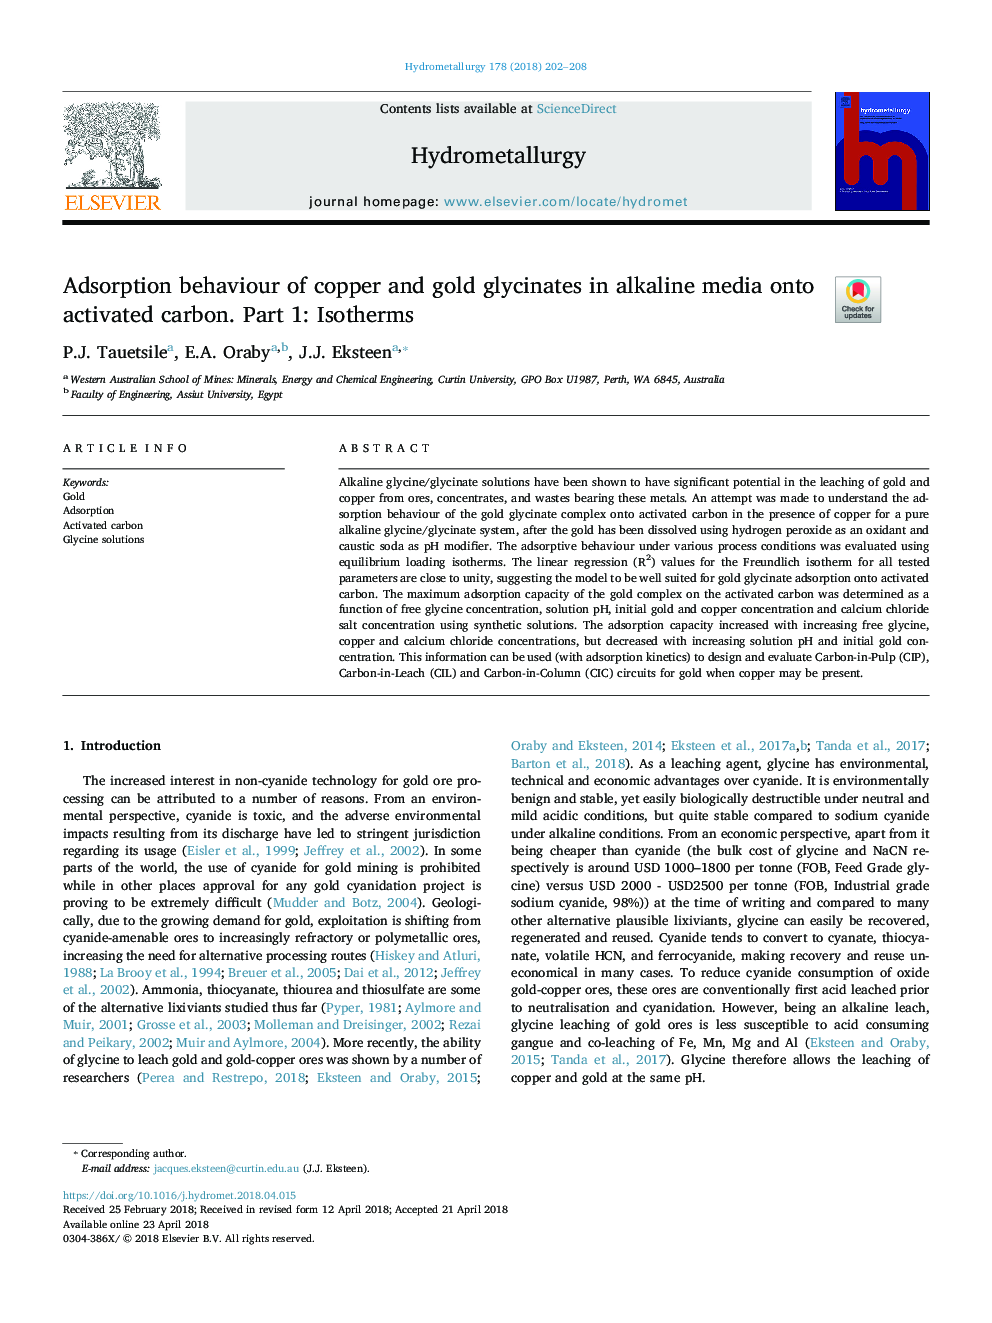 Adsorption behaviour of copper and gold glycinates in alkaline media onto activated carbon. Part 1: Isotherms